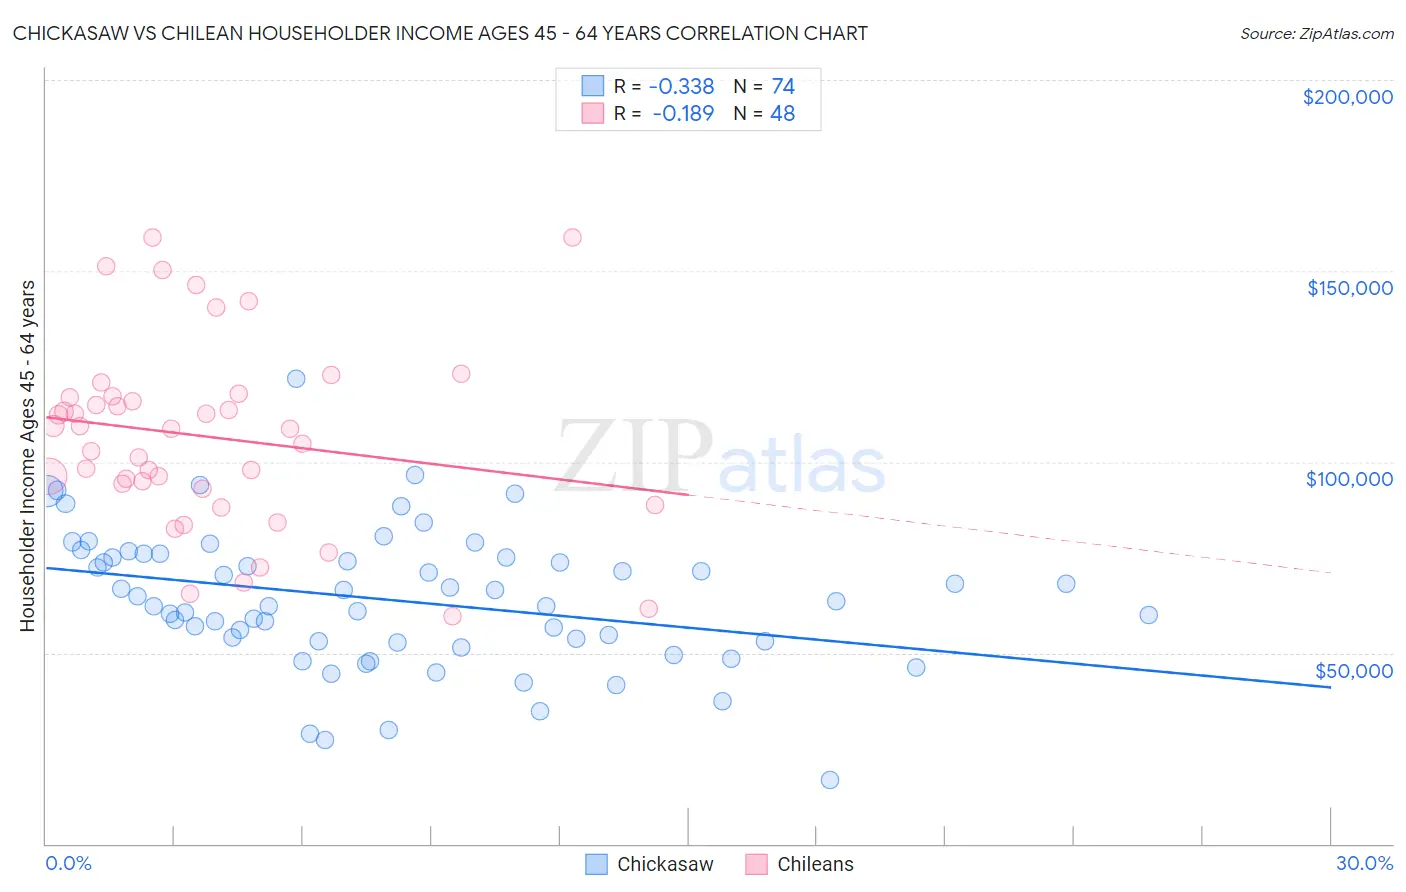 Chickasaw vs Chilean Householder Income Ages 45 - 64 years